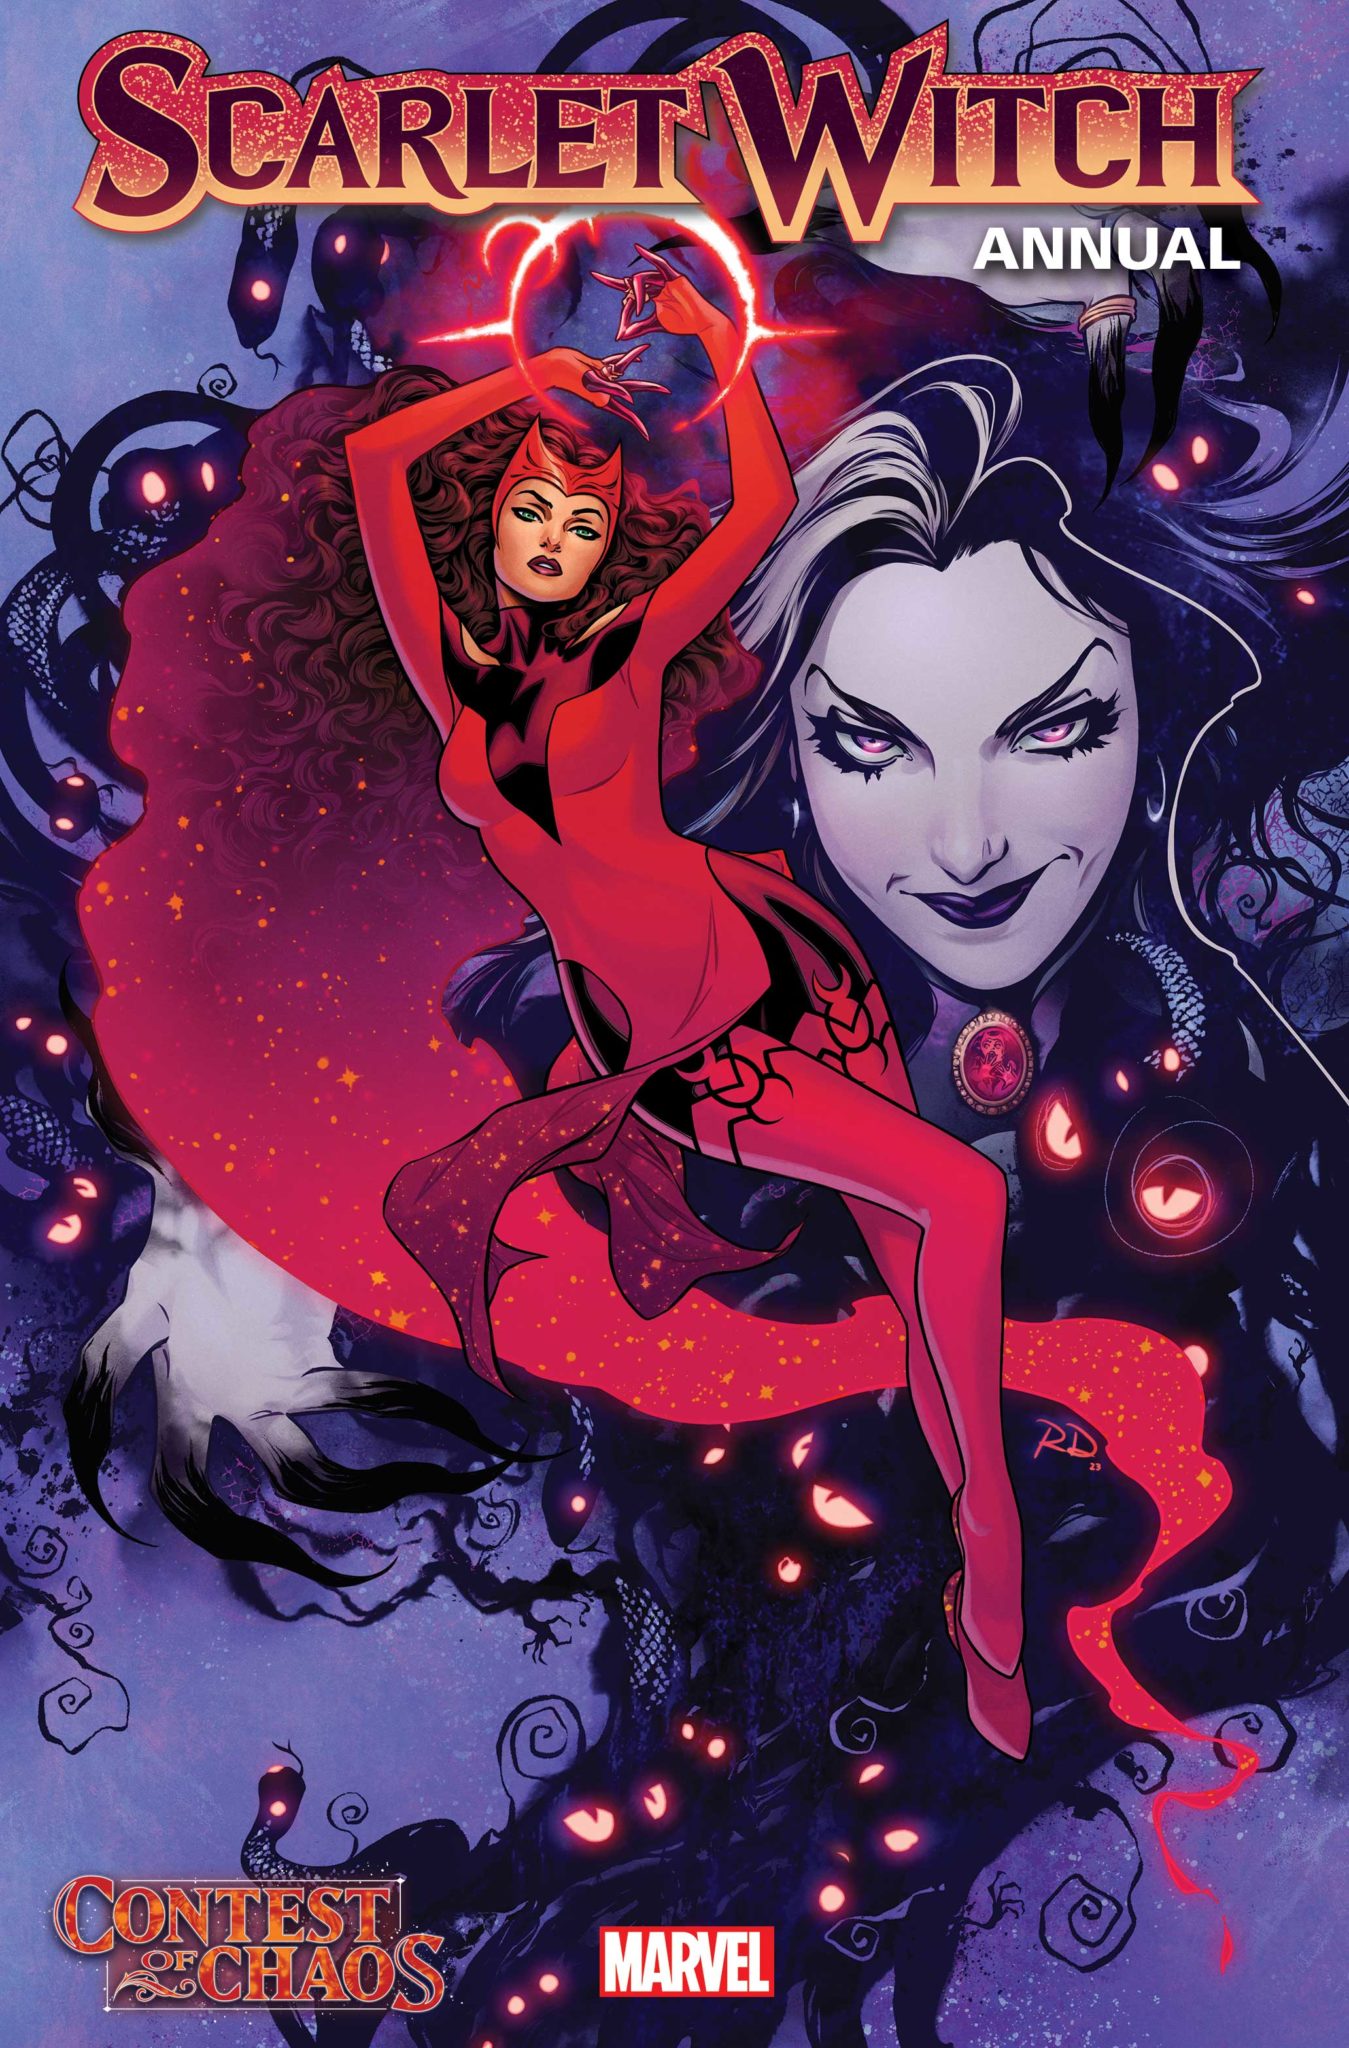 Scarlet Witch Annual #1 cover